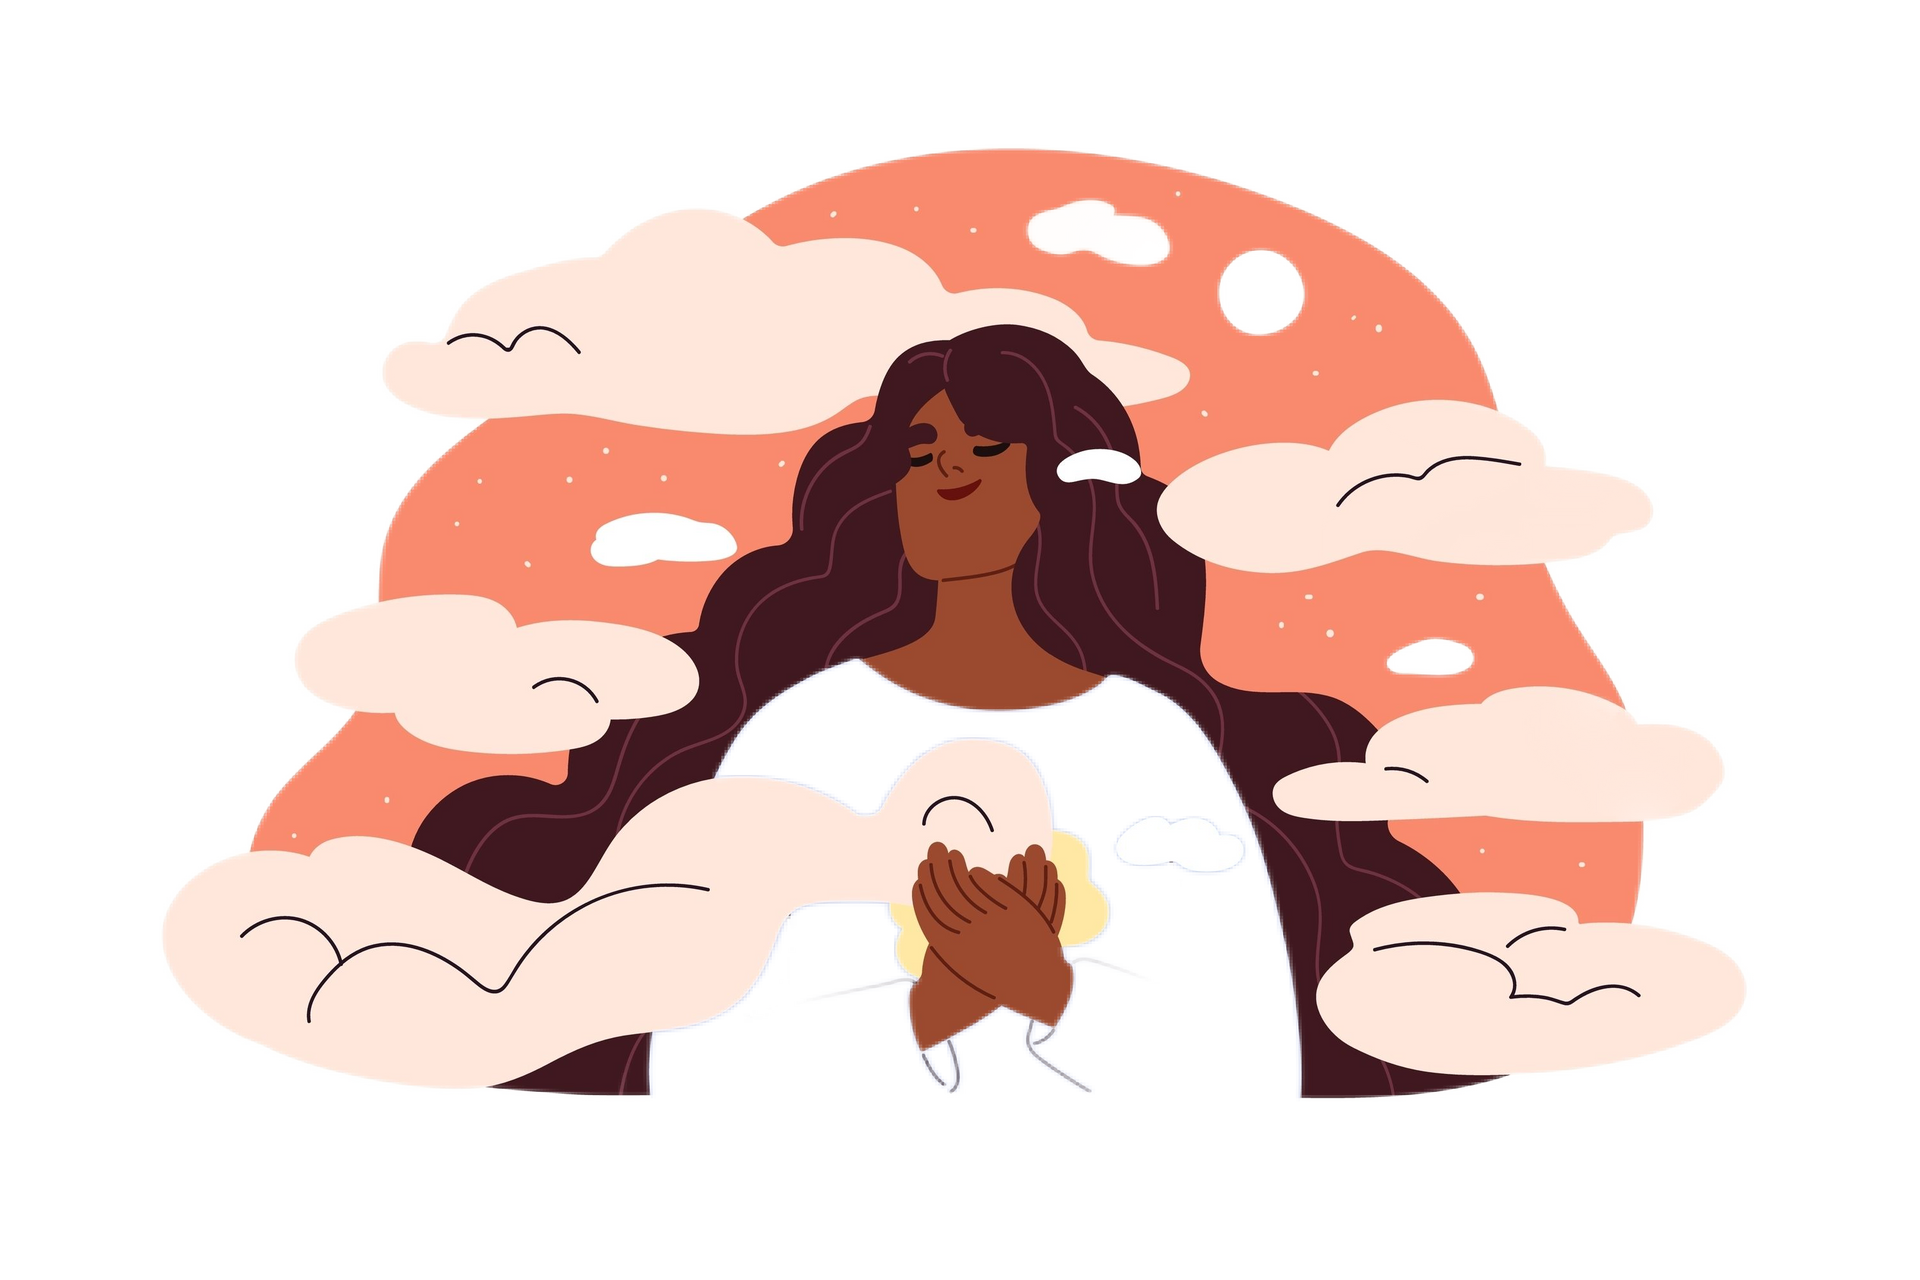 A woman with long hair is praying in front of a cloudy sky.